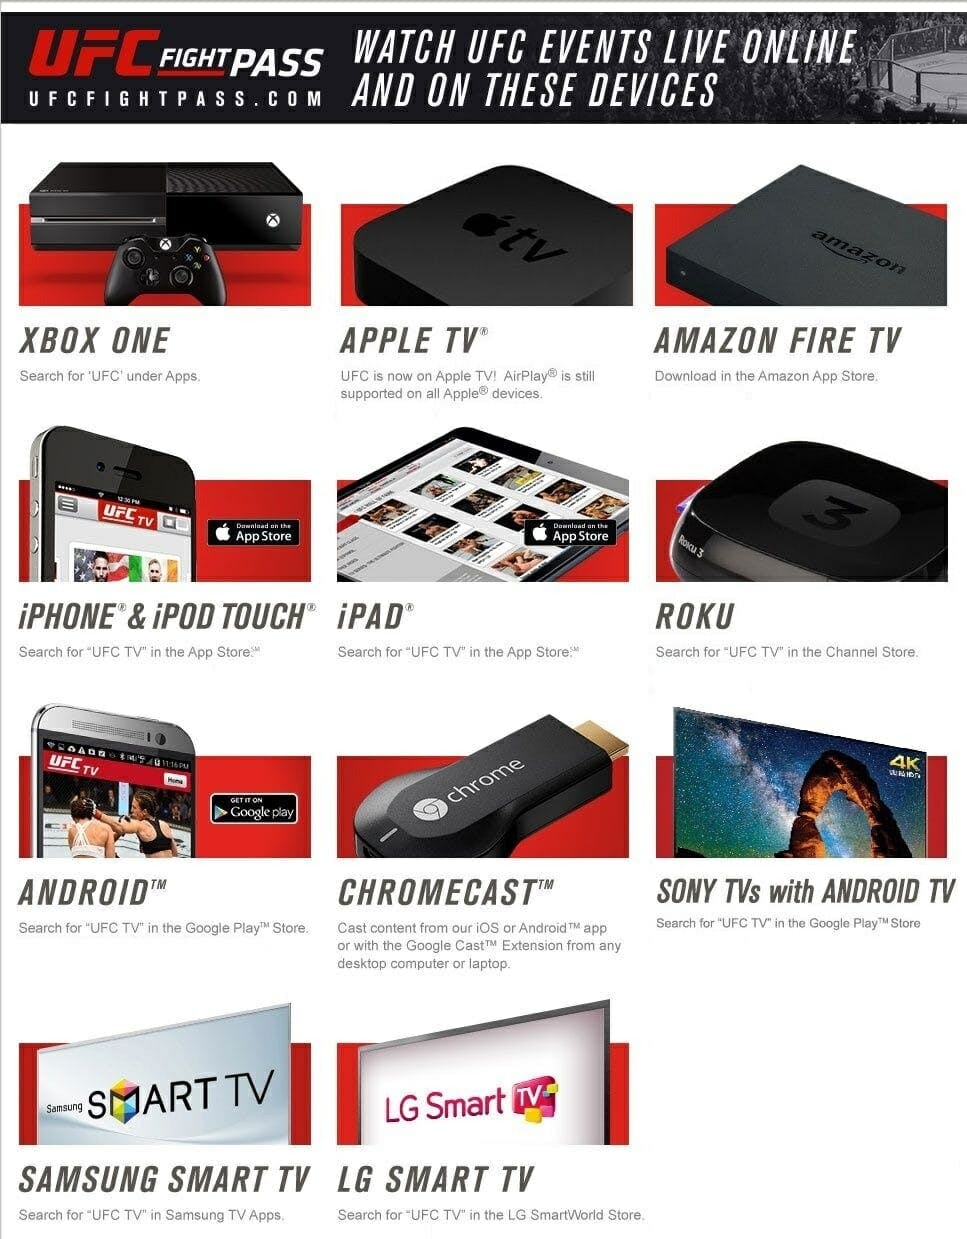 UFC fight pass streaming devices